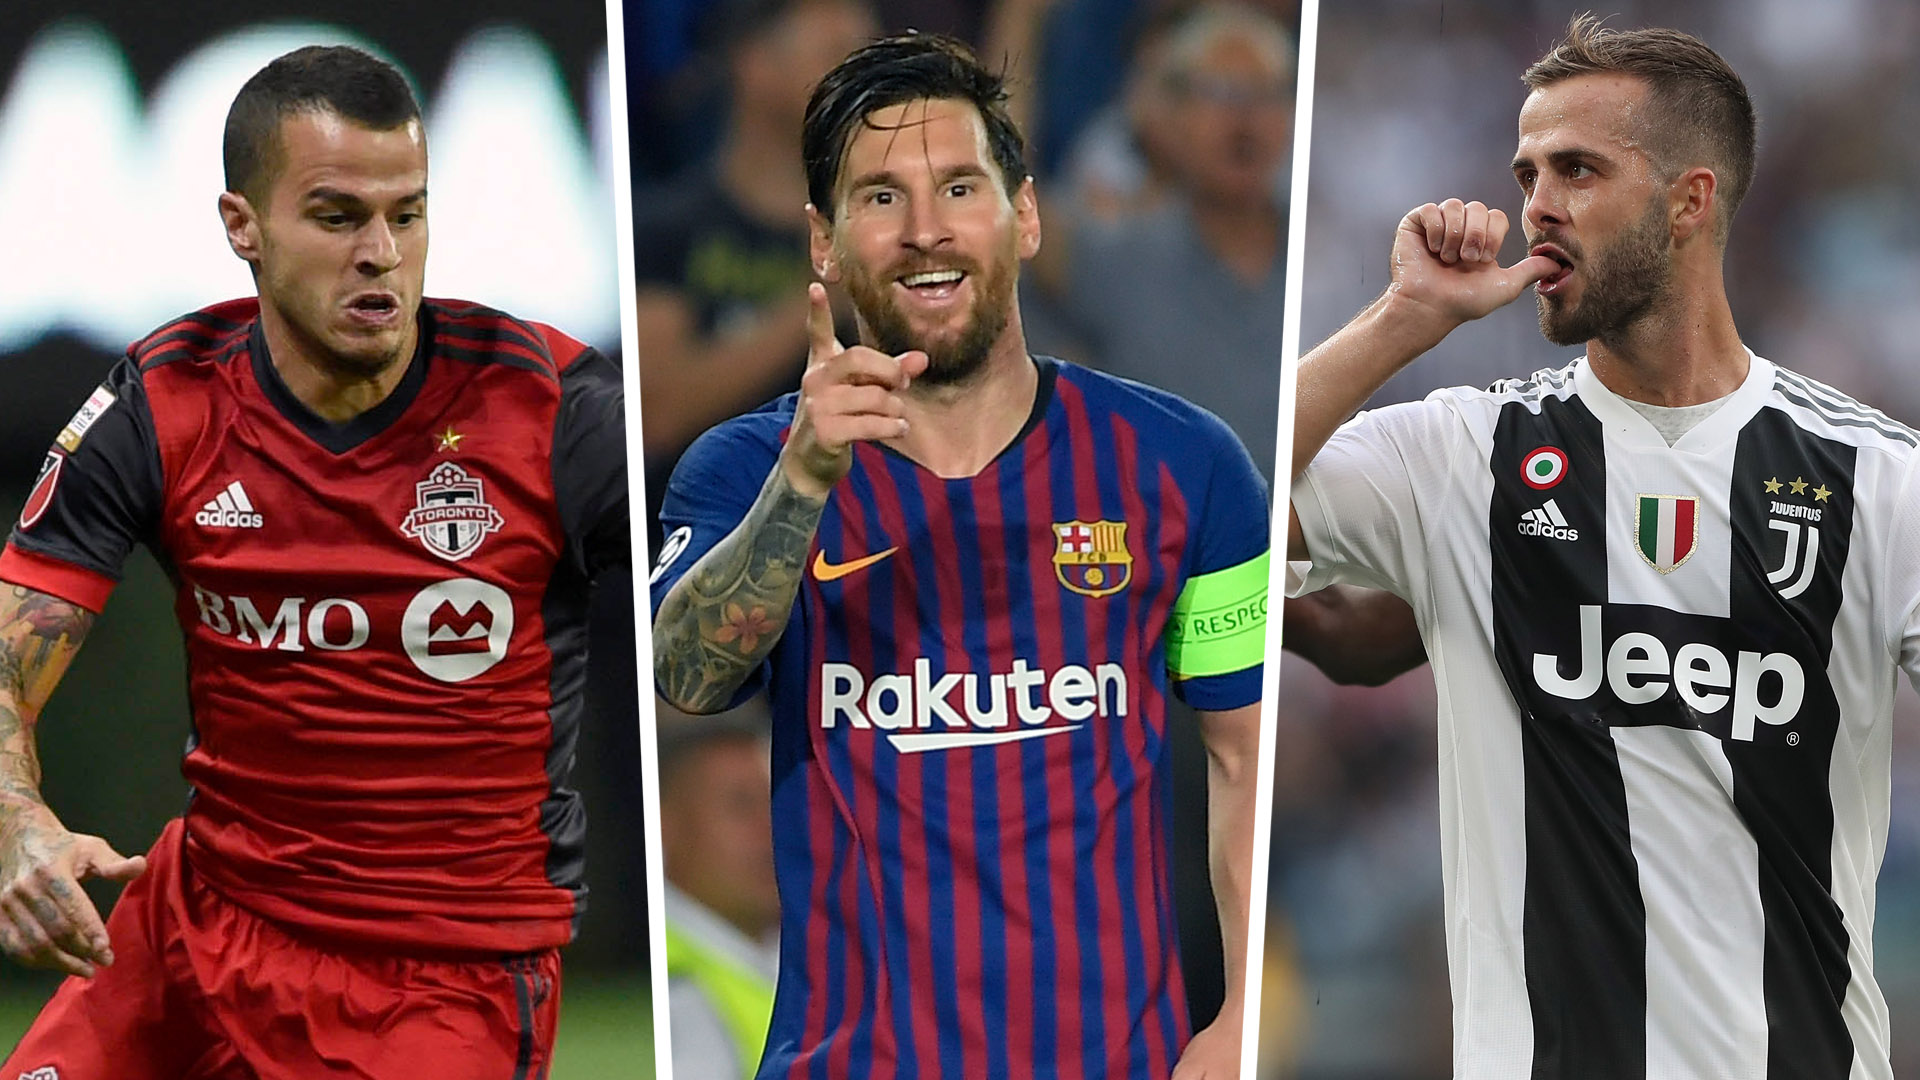 FIFA 19 ratings: Messi, Pjanic and the best free-kick takers in the game1920 x 1080